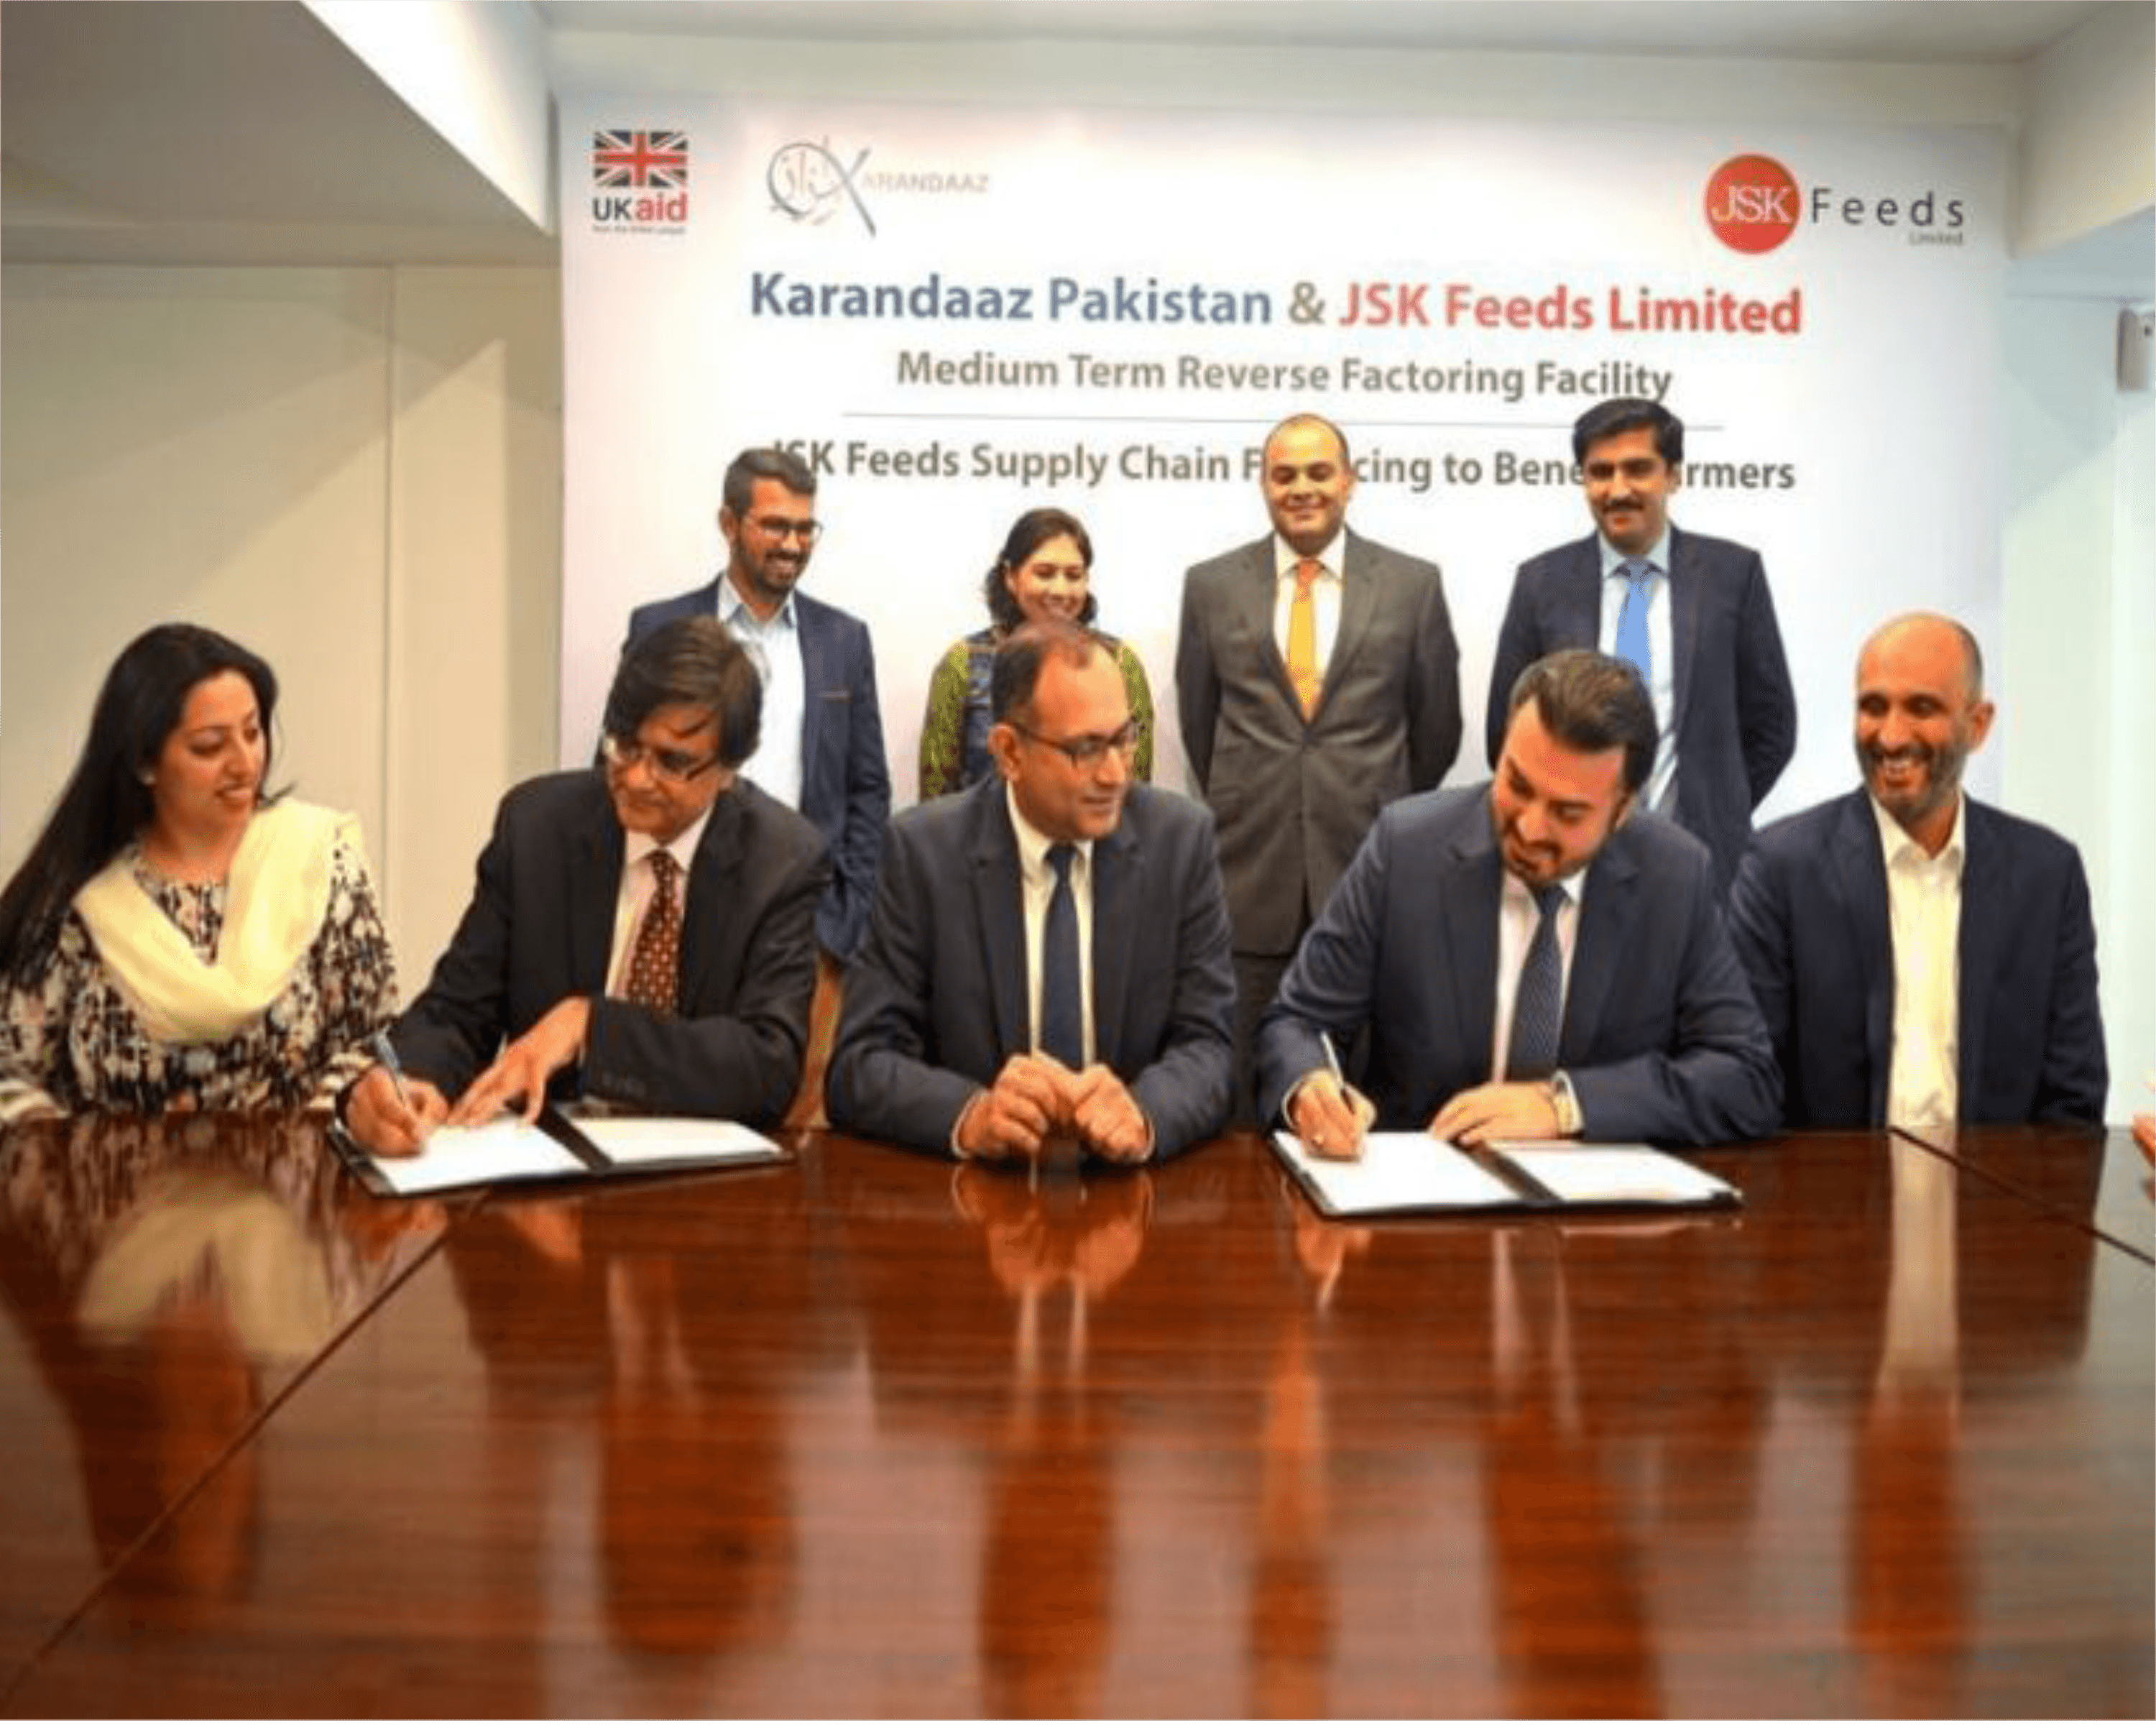 JSK feed, Access-to-direct-financing-for-businesses-in-poultry-industry-made-easier-by-the-UK-Funded-Karandaaz